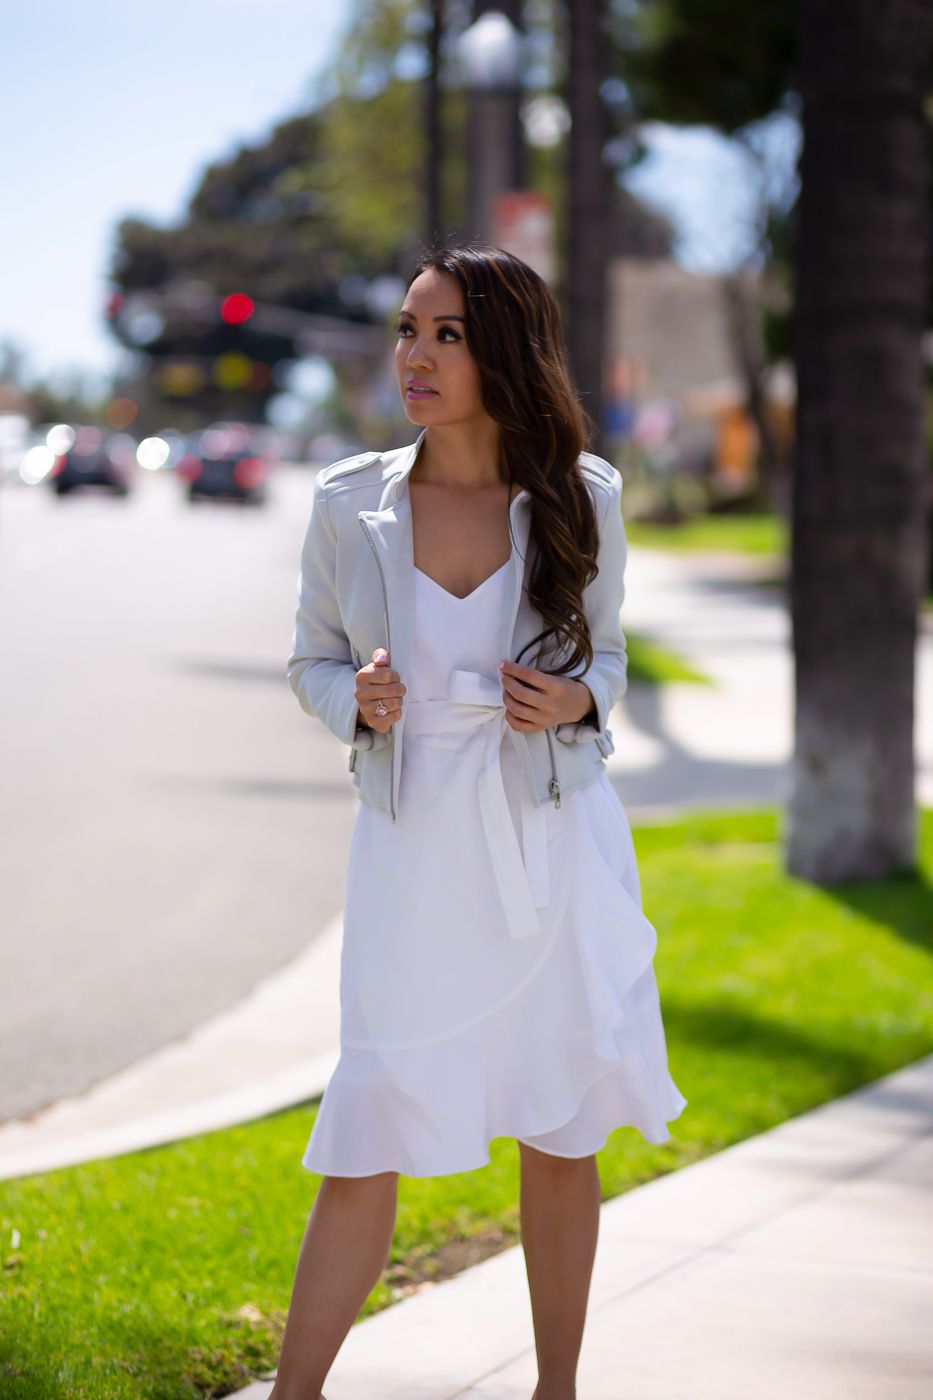 Create Chic Looks with Ruffle Wrap Skirts and Dresses